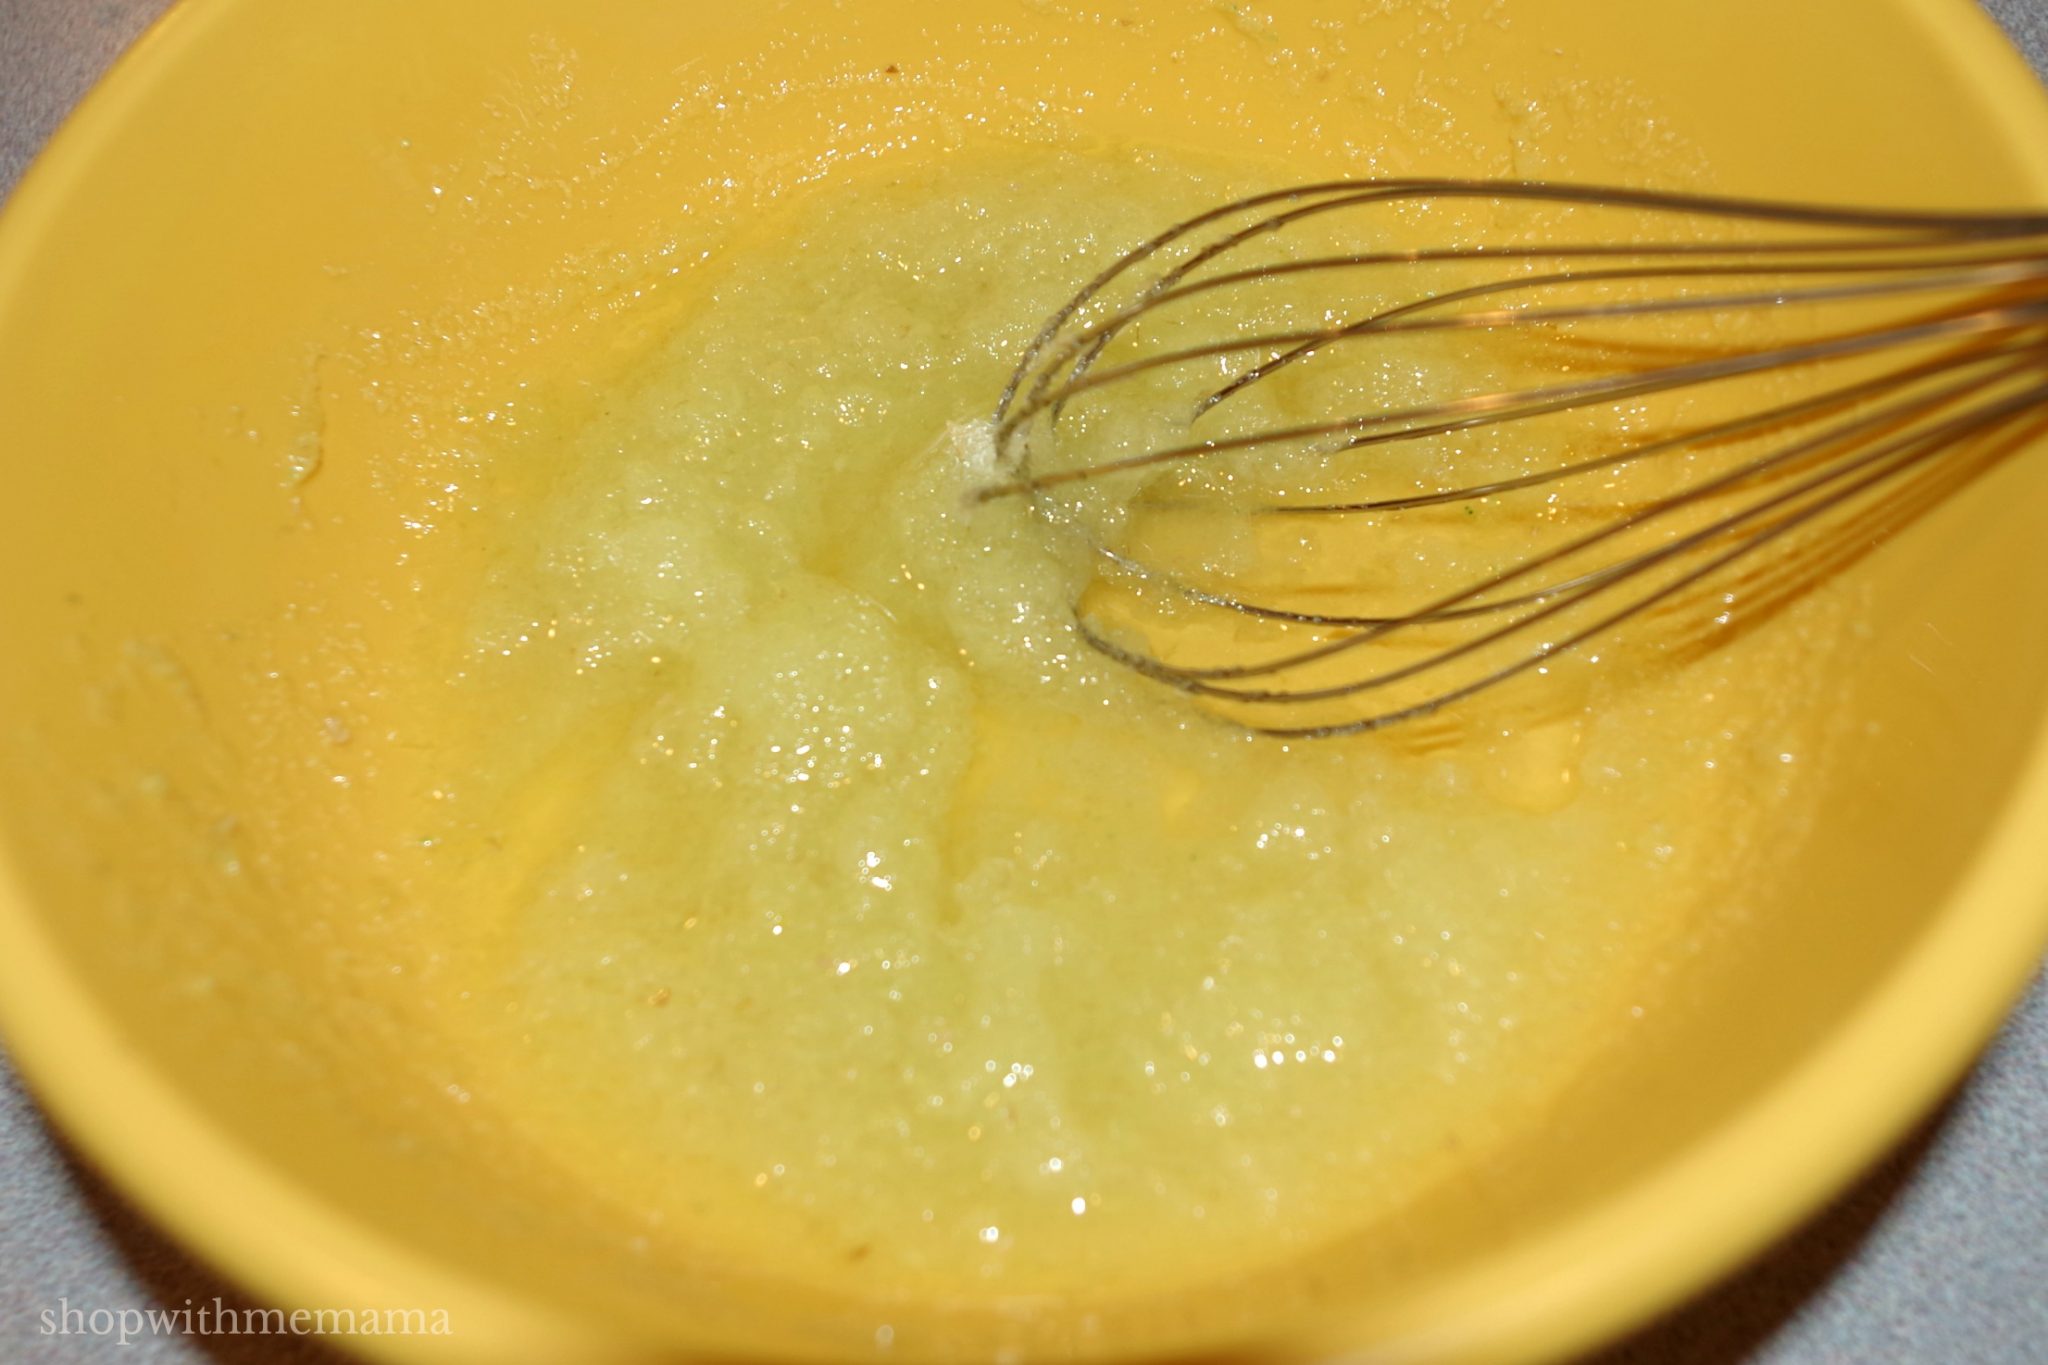 5 Steps To Making Your Own Ginger And Lemon Sugar Scrub!